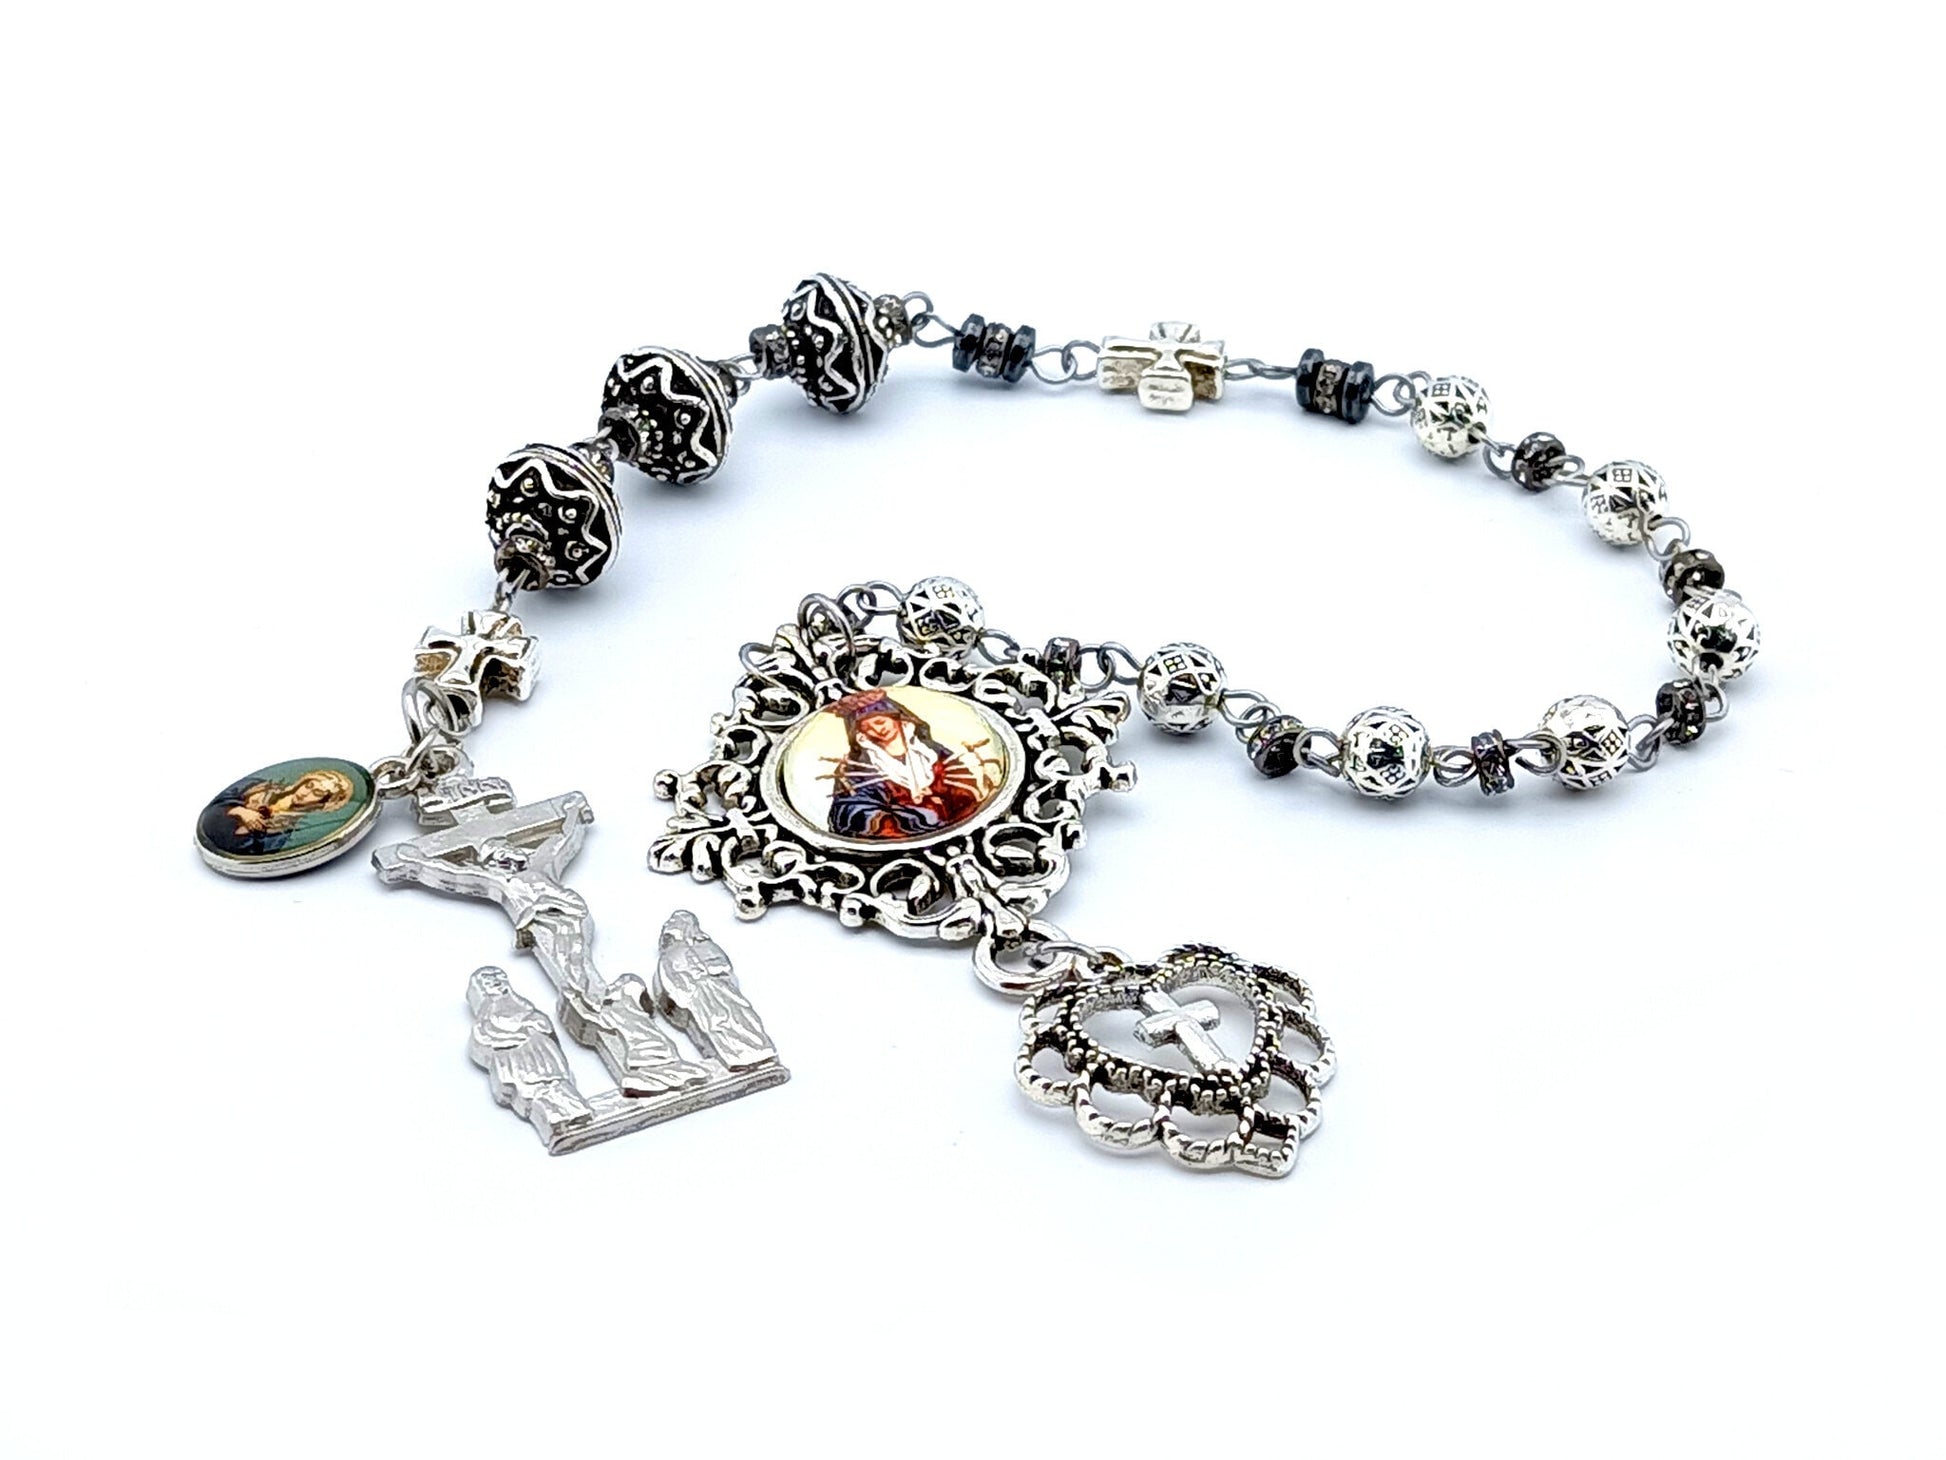 Our Lady of Sorrows unique rosary beads dolor servite rosary with silver metal beads, picture centre medal and two Marys crucifix.